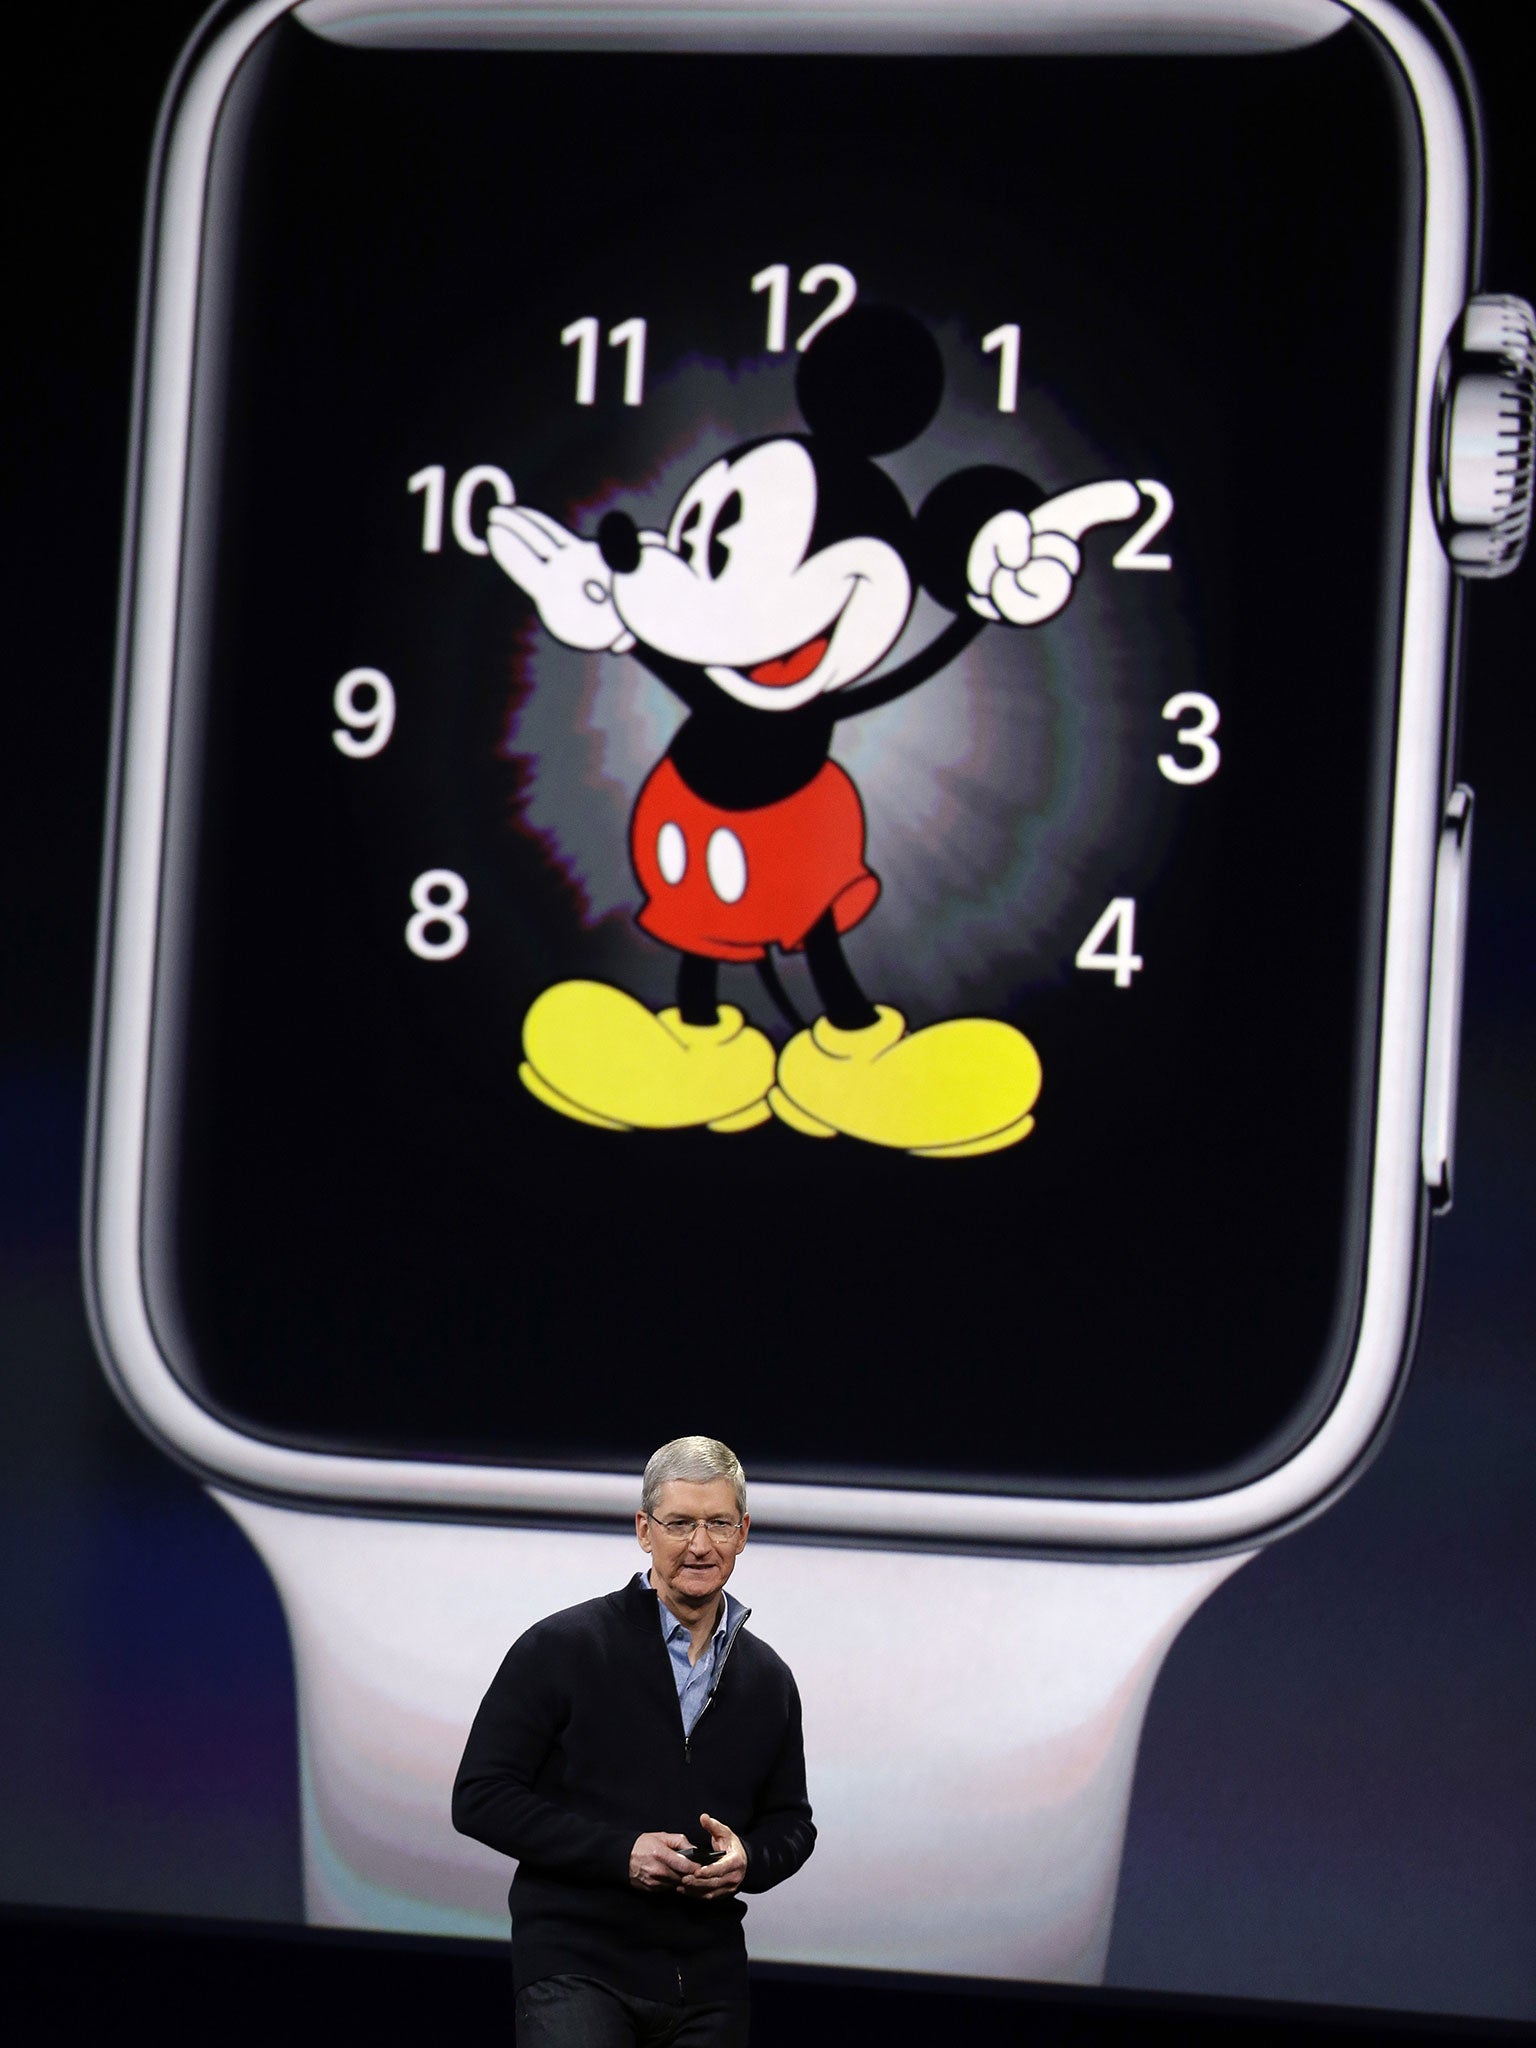 Sales of the Apple Watch are reported to have plunged although Apple CEO Tim Cook claims demand was outstripping supply